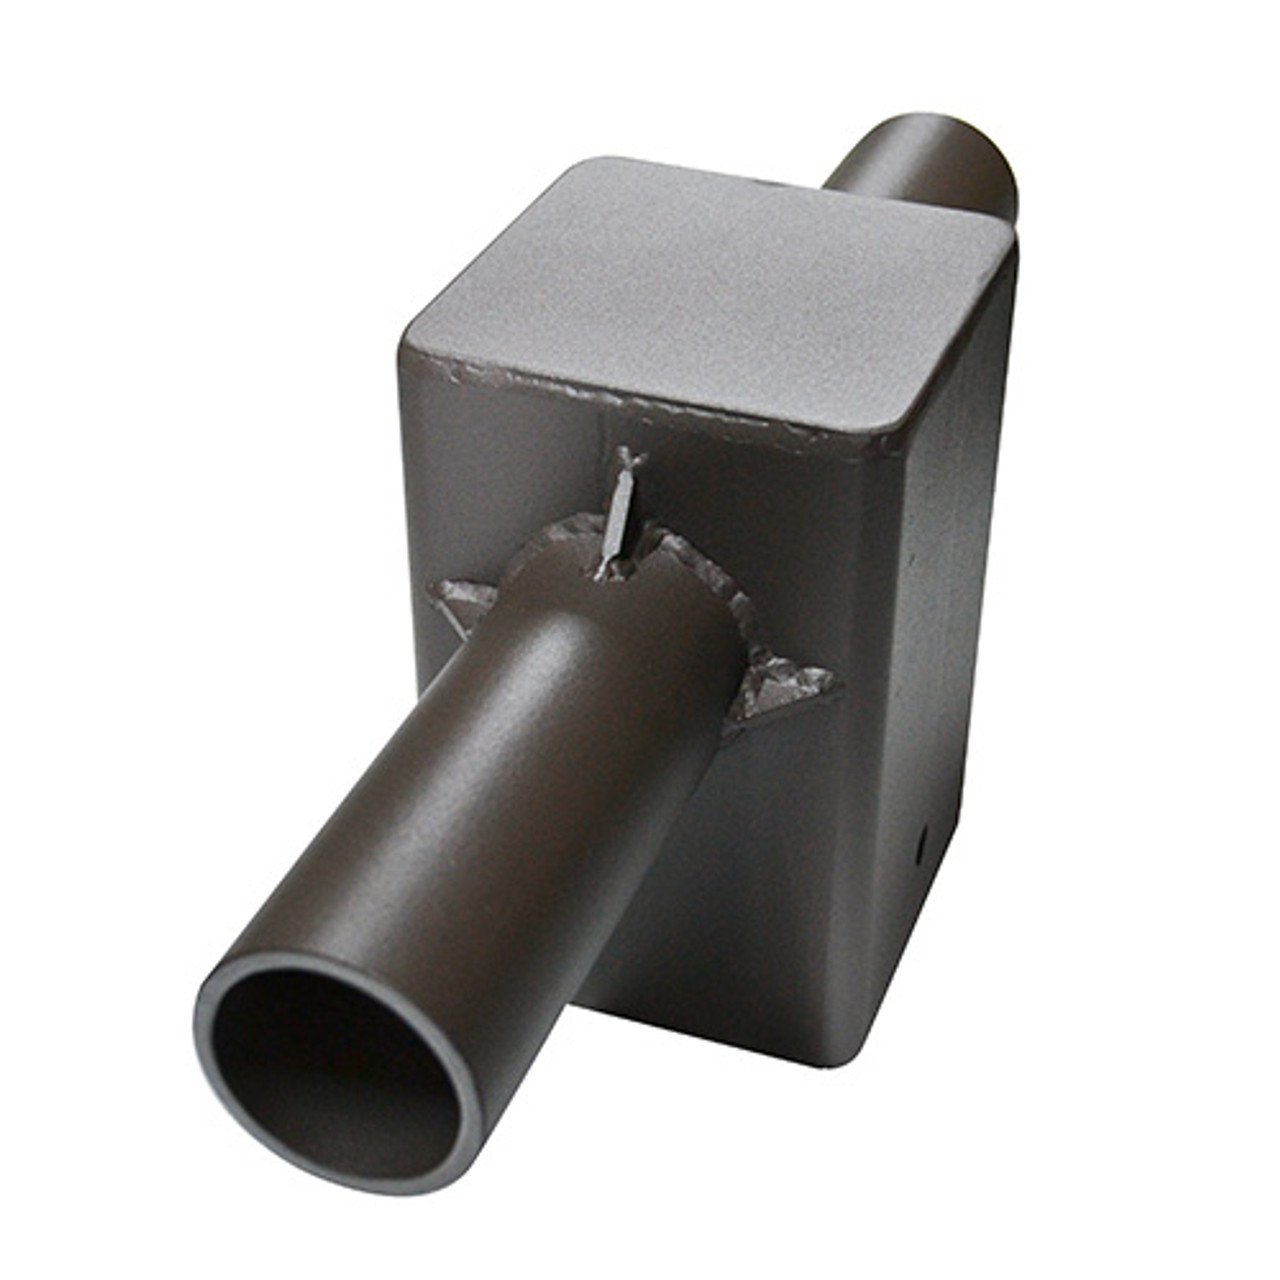 Mount - Square to Round Pole - 2 Head for 4" Square Pole